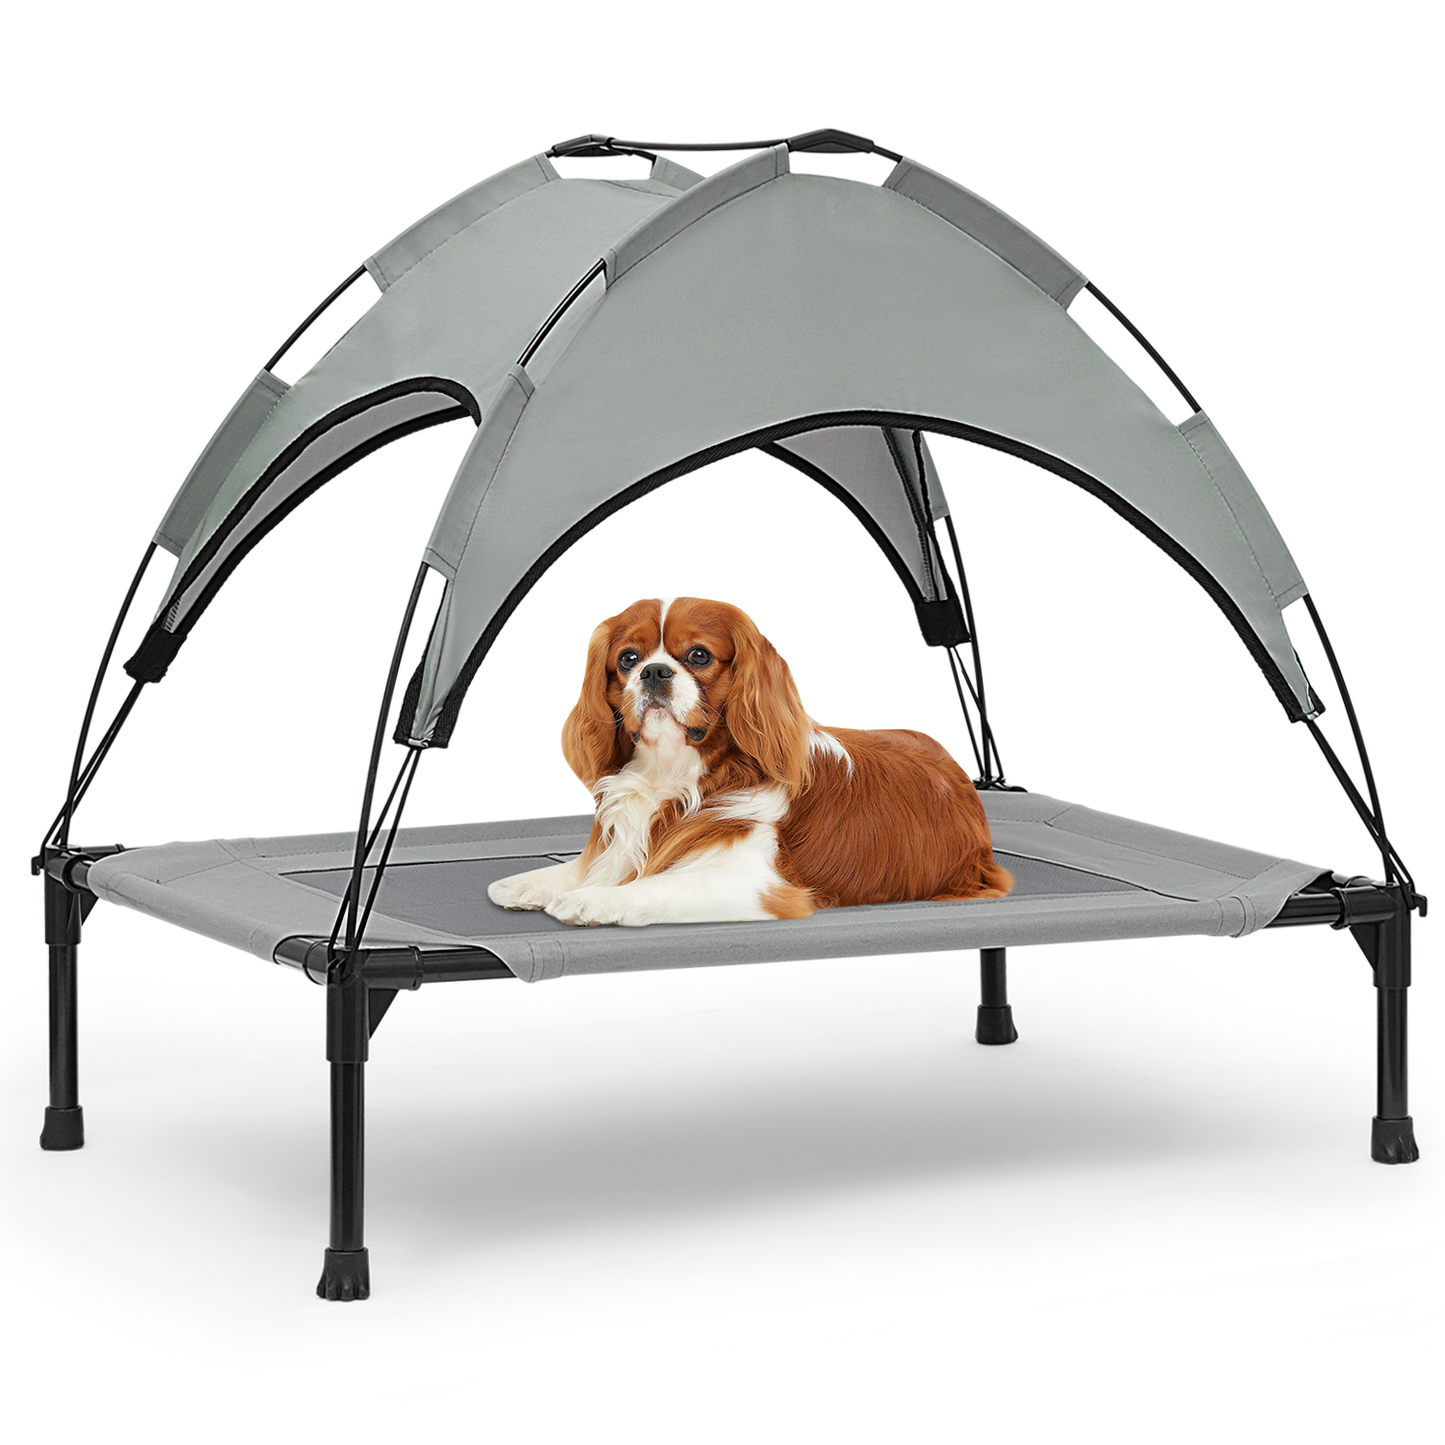 Pet Bed - w/ Canopy - Grey